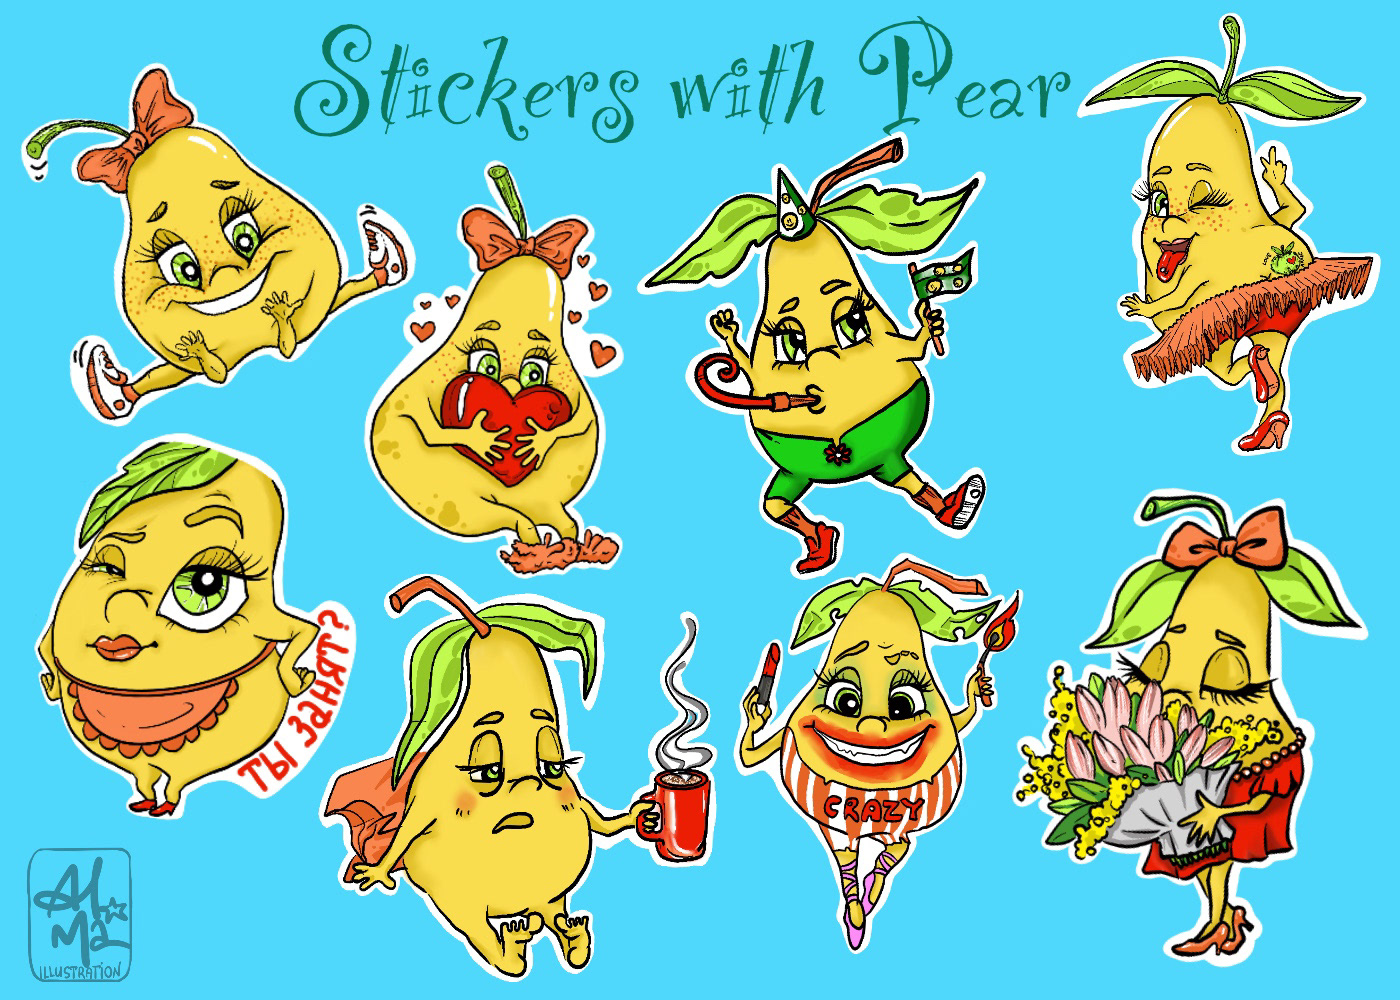 Stickers with funny Pear.